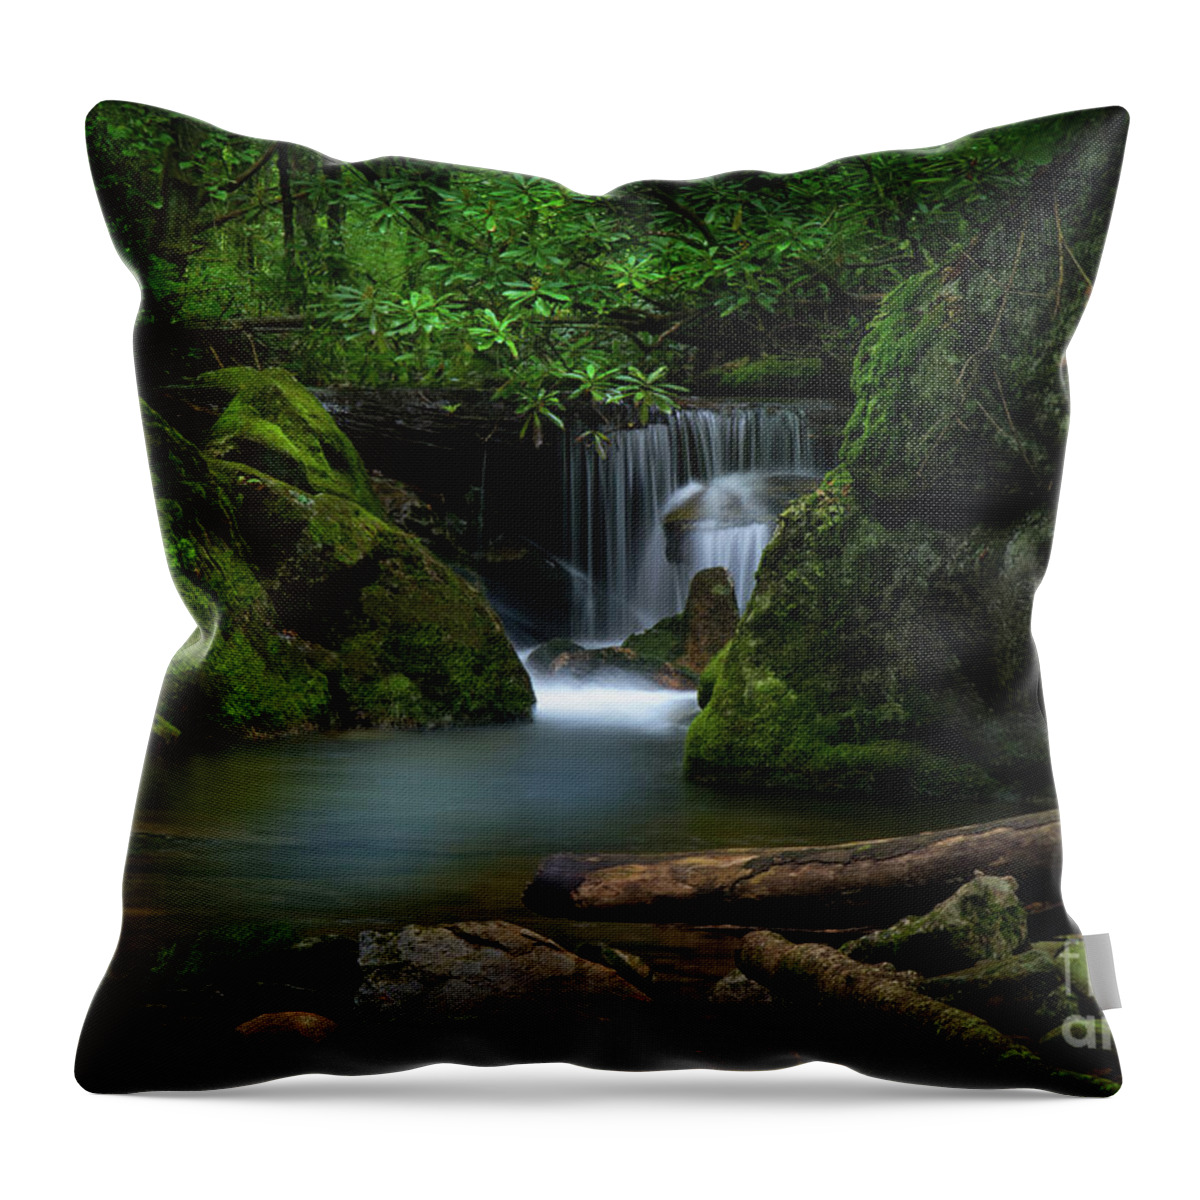 Waterfall Throw Pillow featuring the photograph Secluded Waterfall by Shelia Hunt